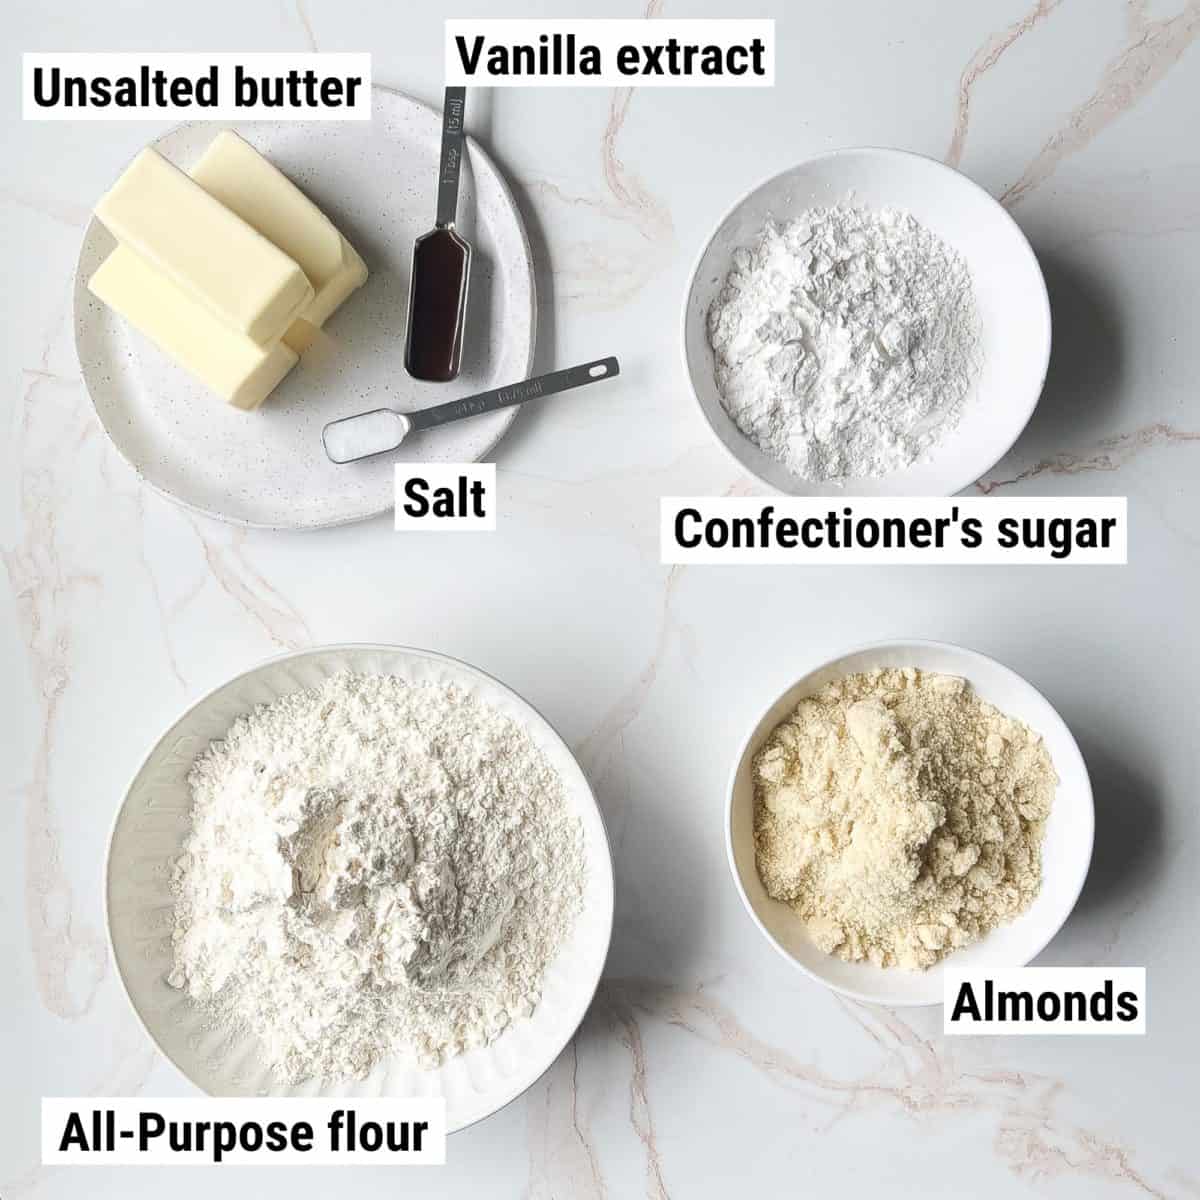 The ingredients used to make Italian wedding cookies spread out on a table.